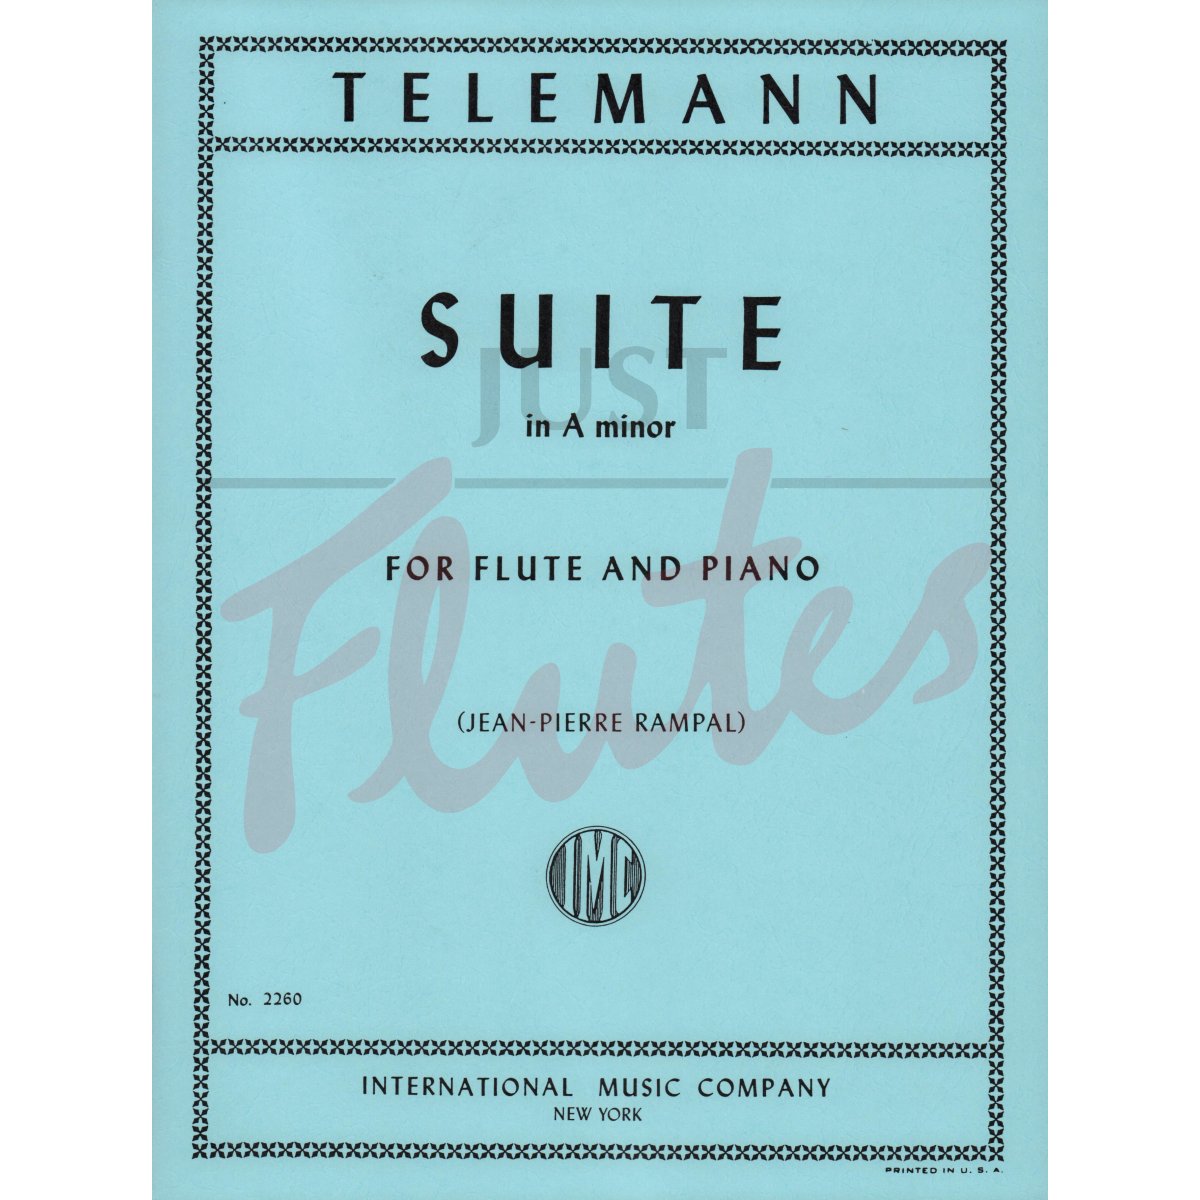 Suite in A minor for Flute and Piano